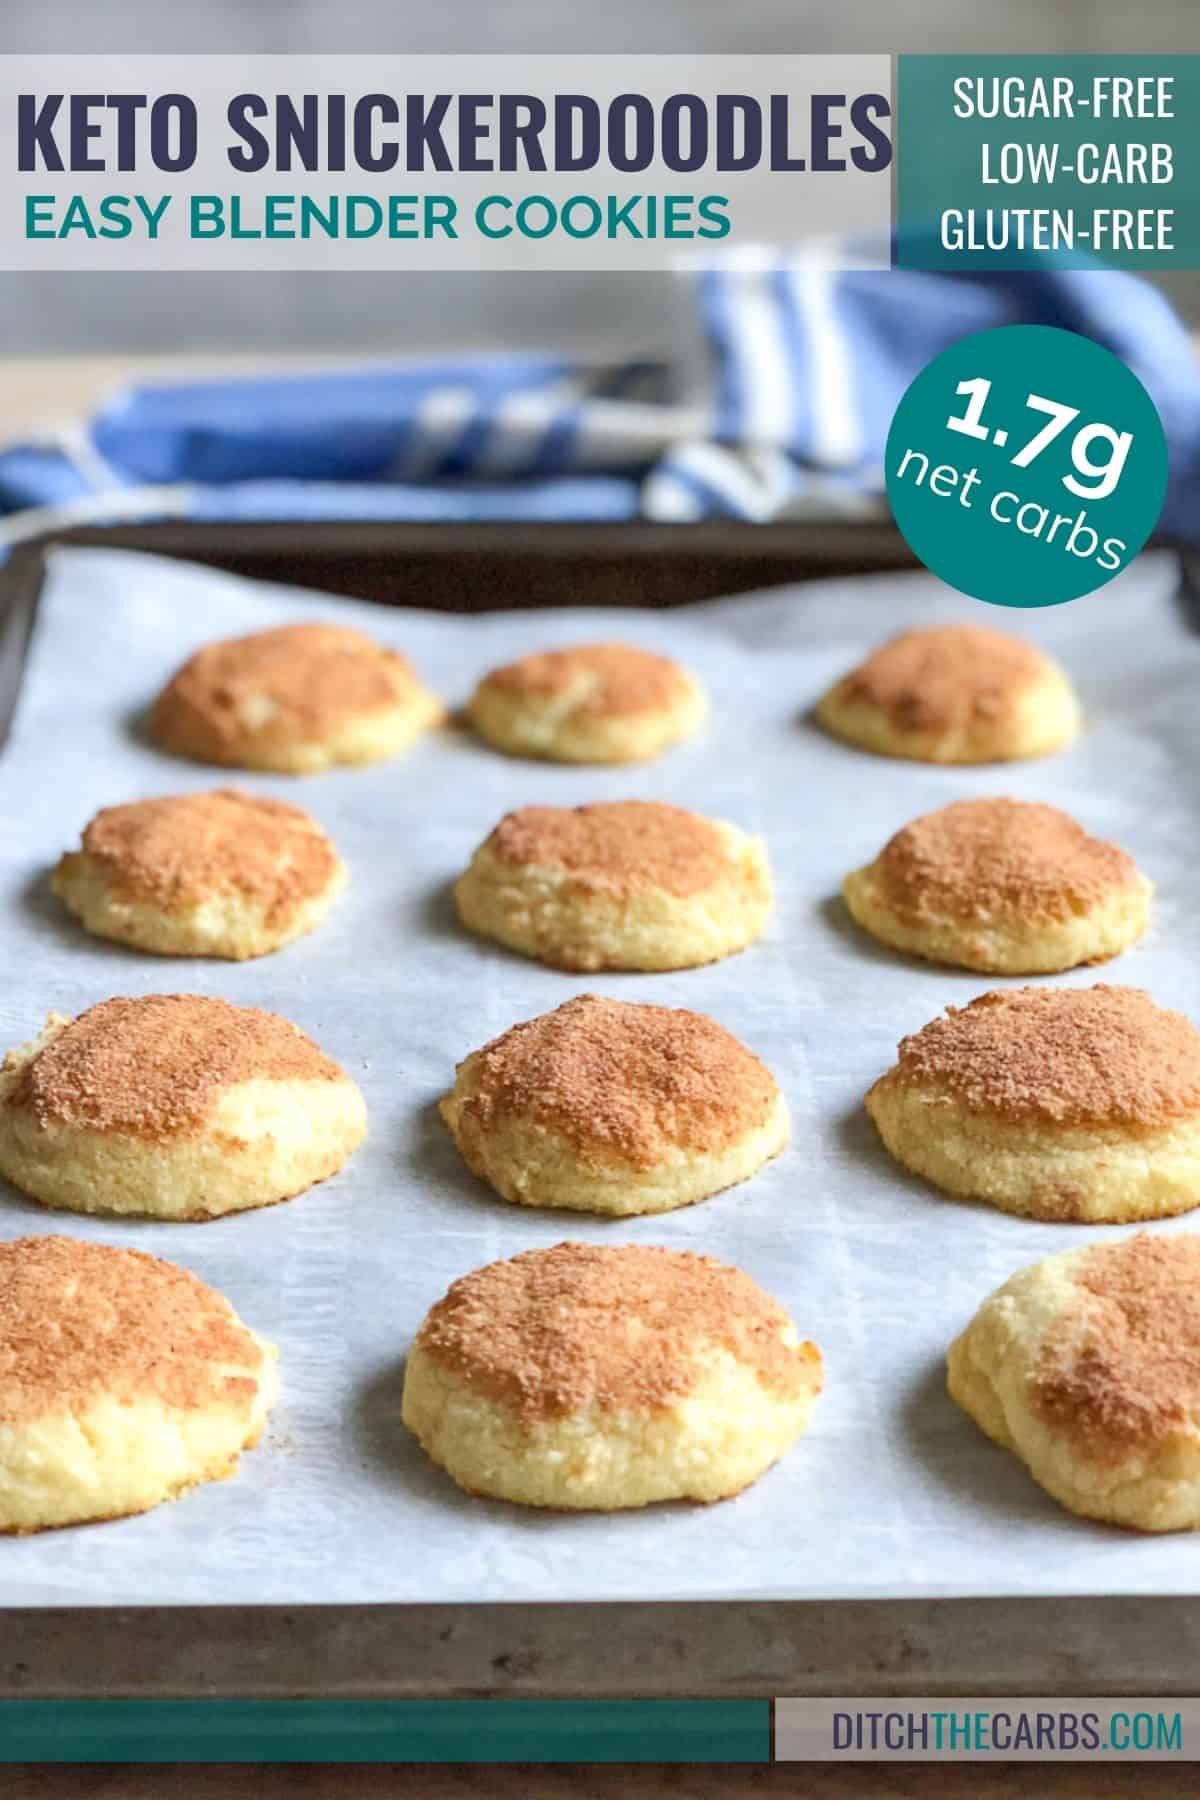 Keto snickerdoodle cookies resting on a metal cookie sheet lined with white parchment paper.